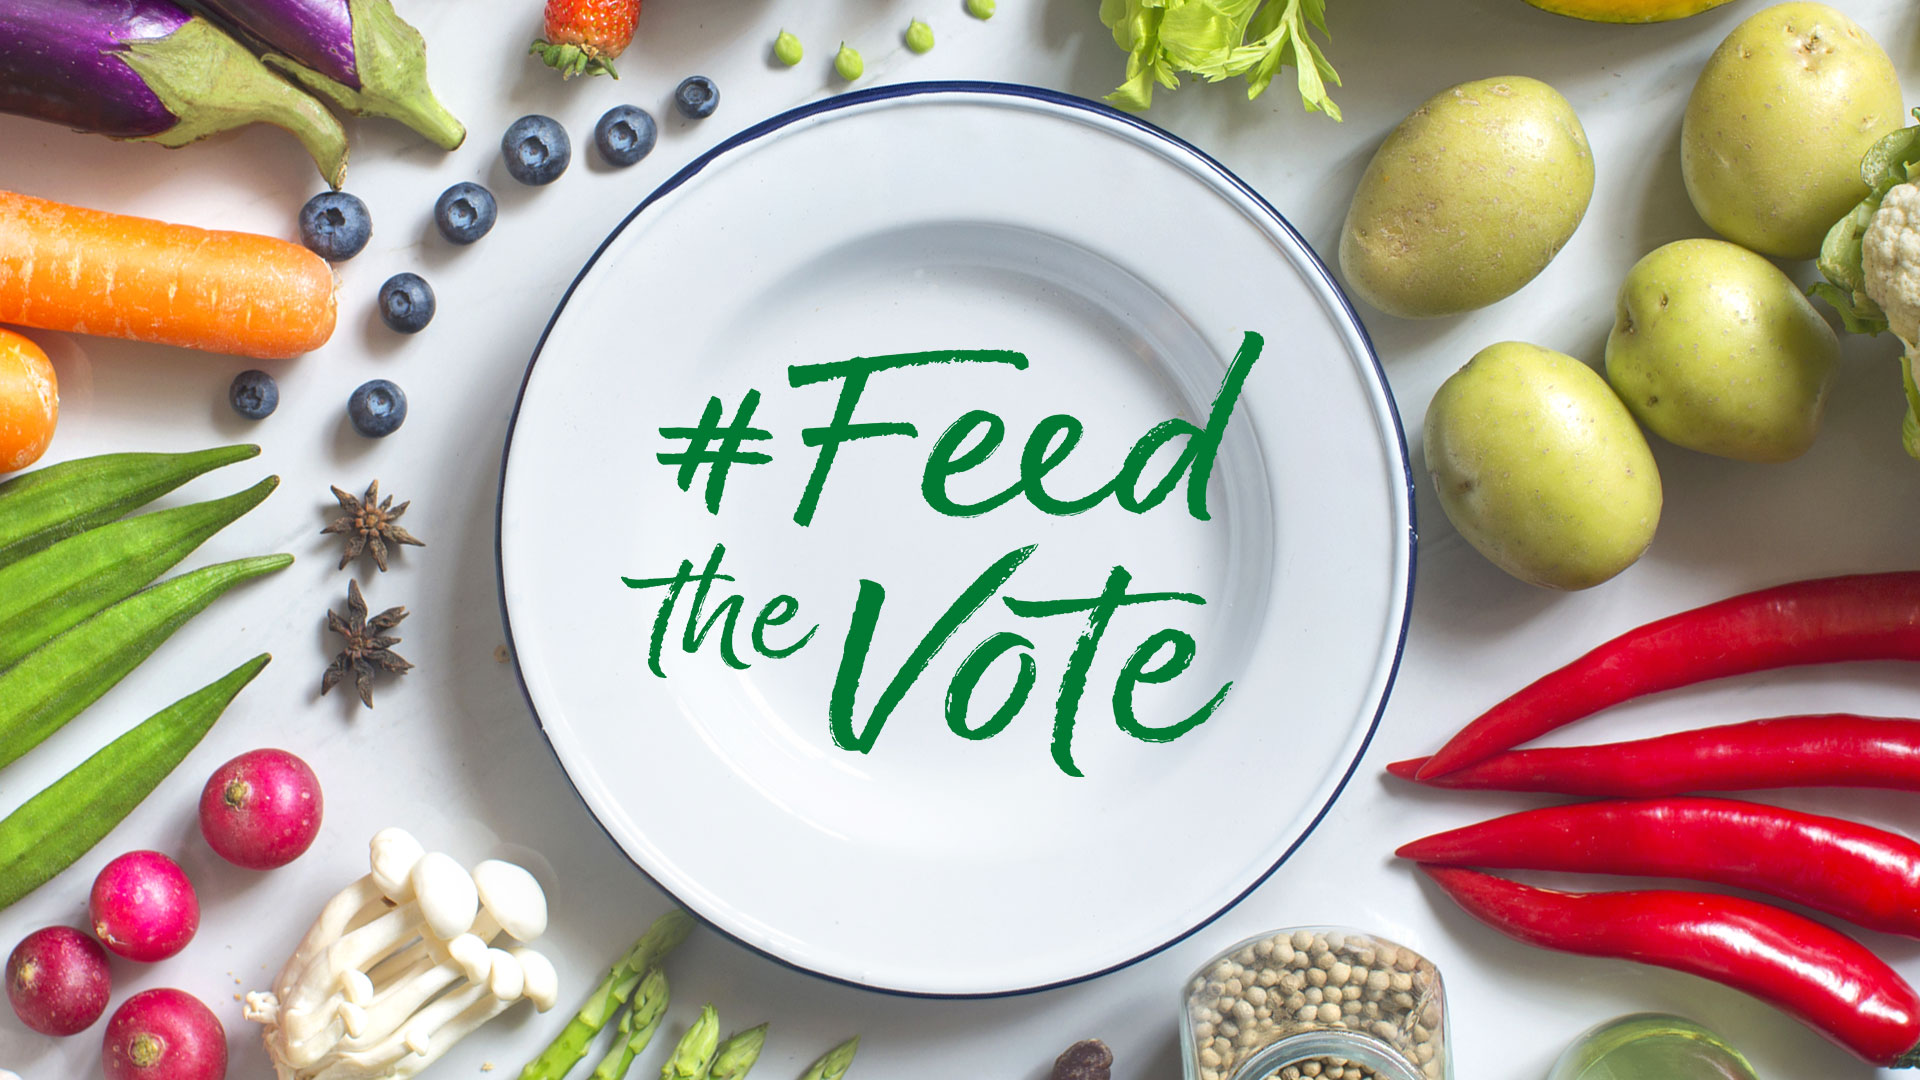 Knorr and Dascha Polanco Launch #FeedTheVote to Elevate Access to Nutritious Food as an Issue This Voting Season